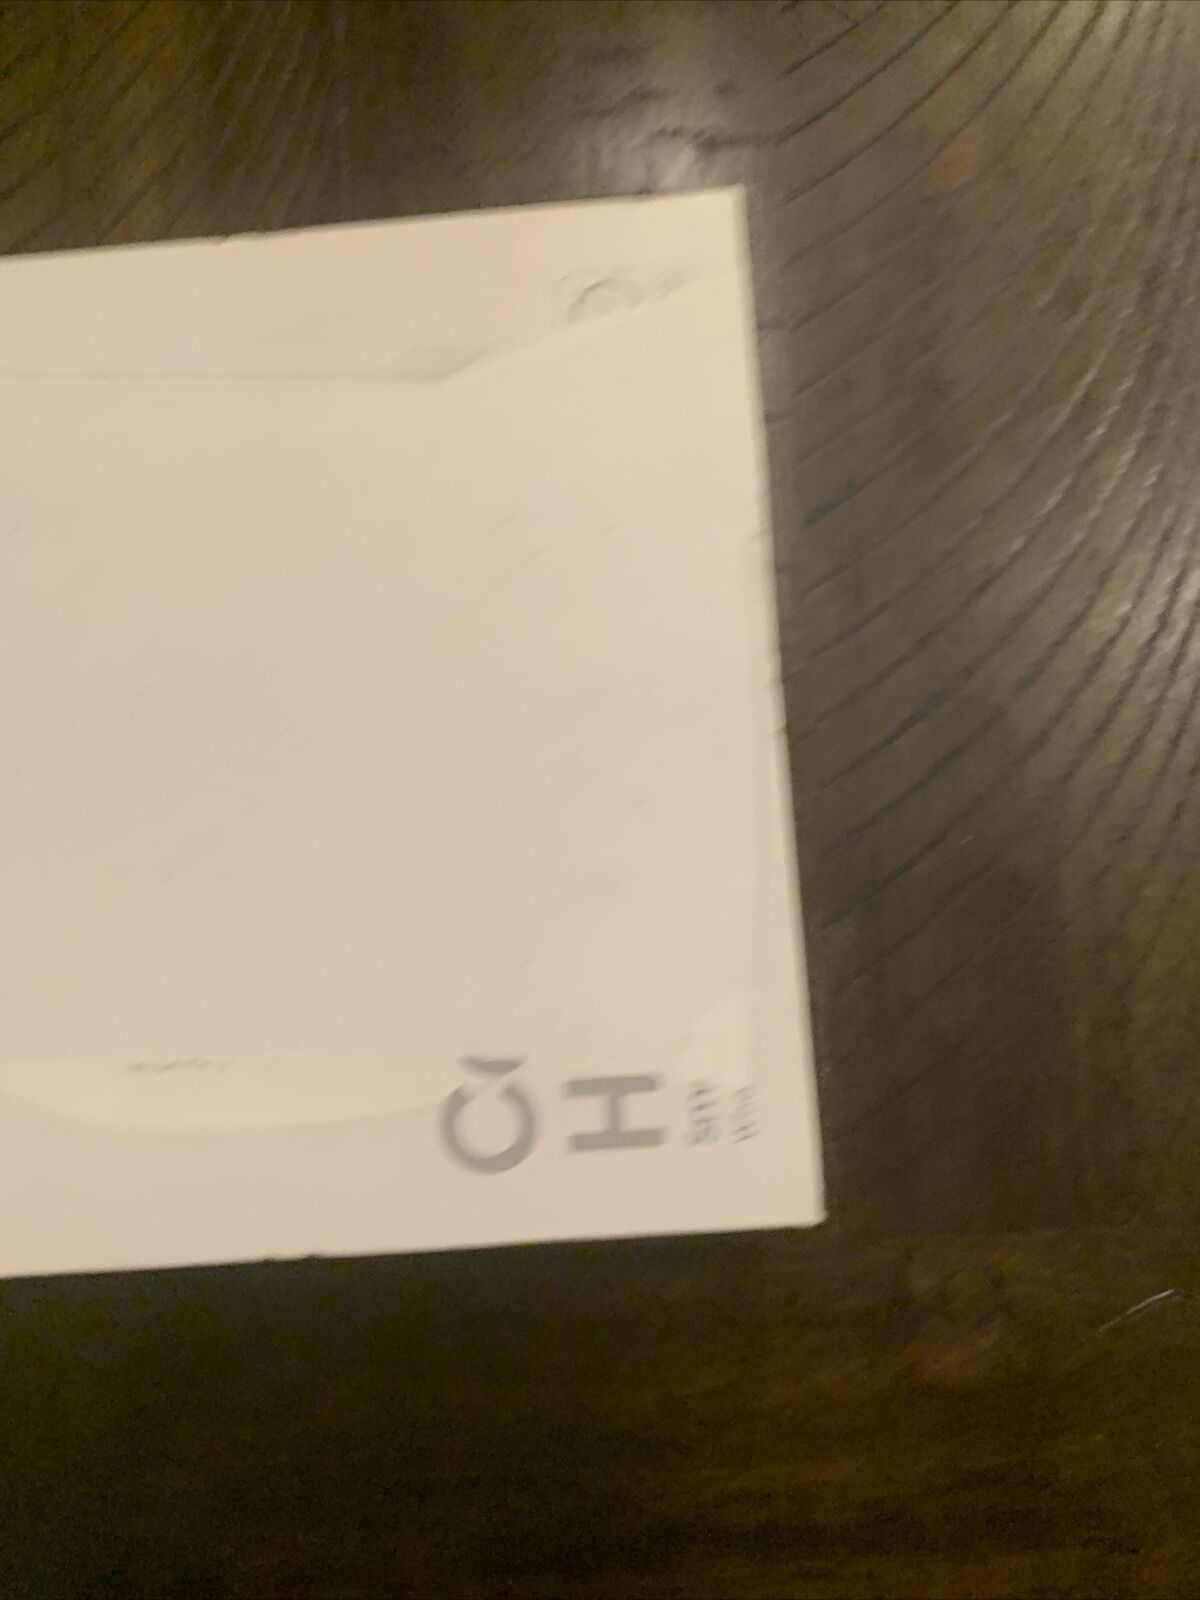 Samsung Connect Home Pro ET-WV530 AC2600 Smart Wi-fi System BOX HAS DAMAGE